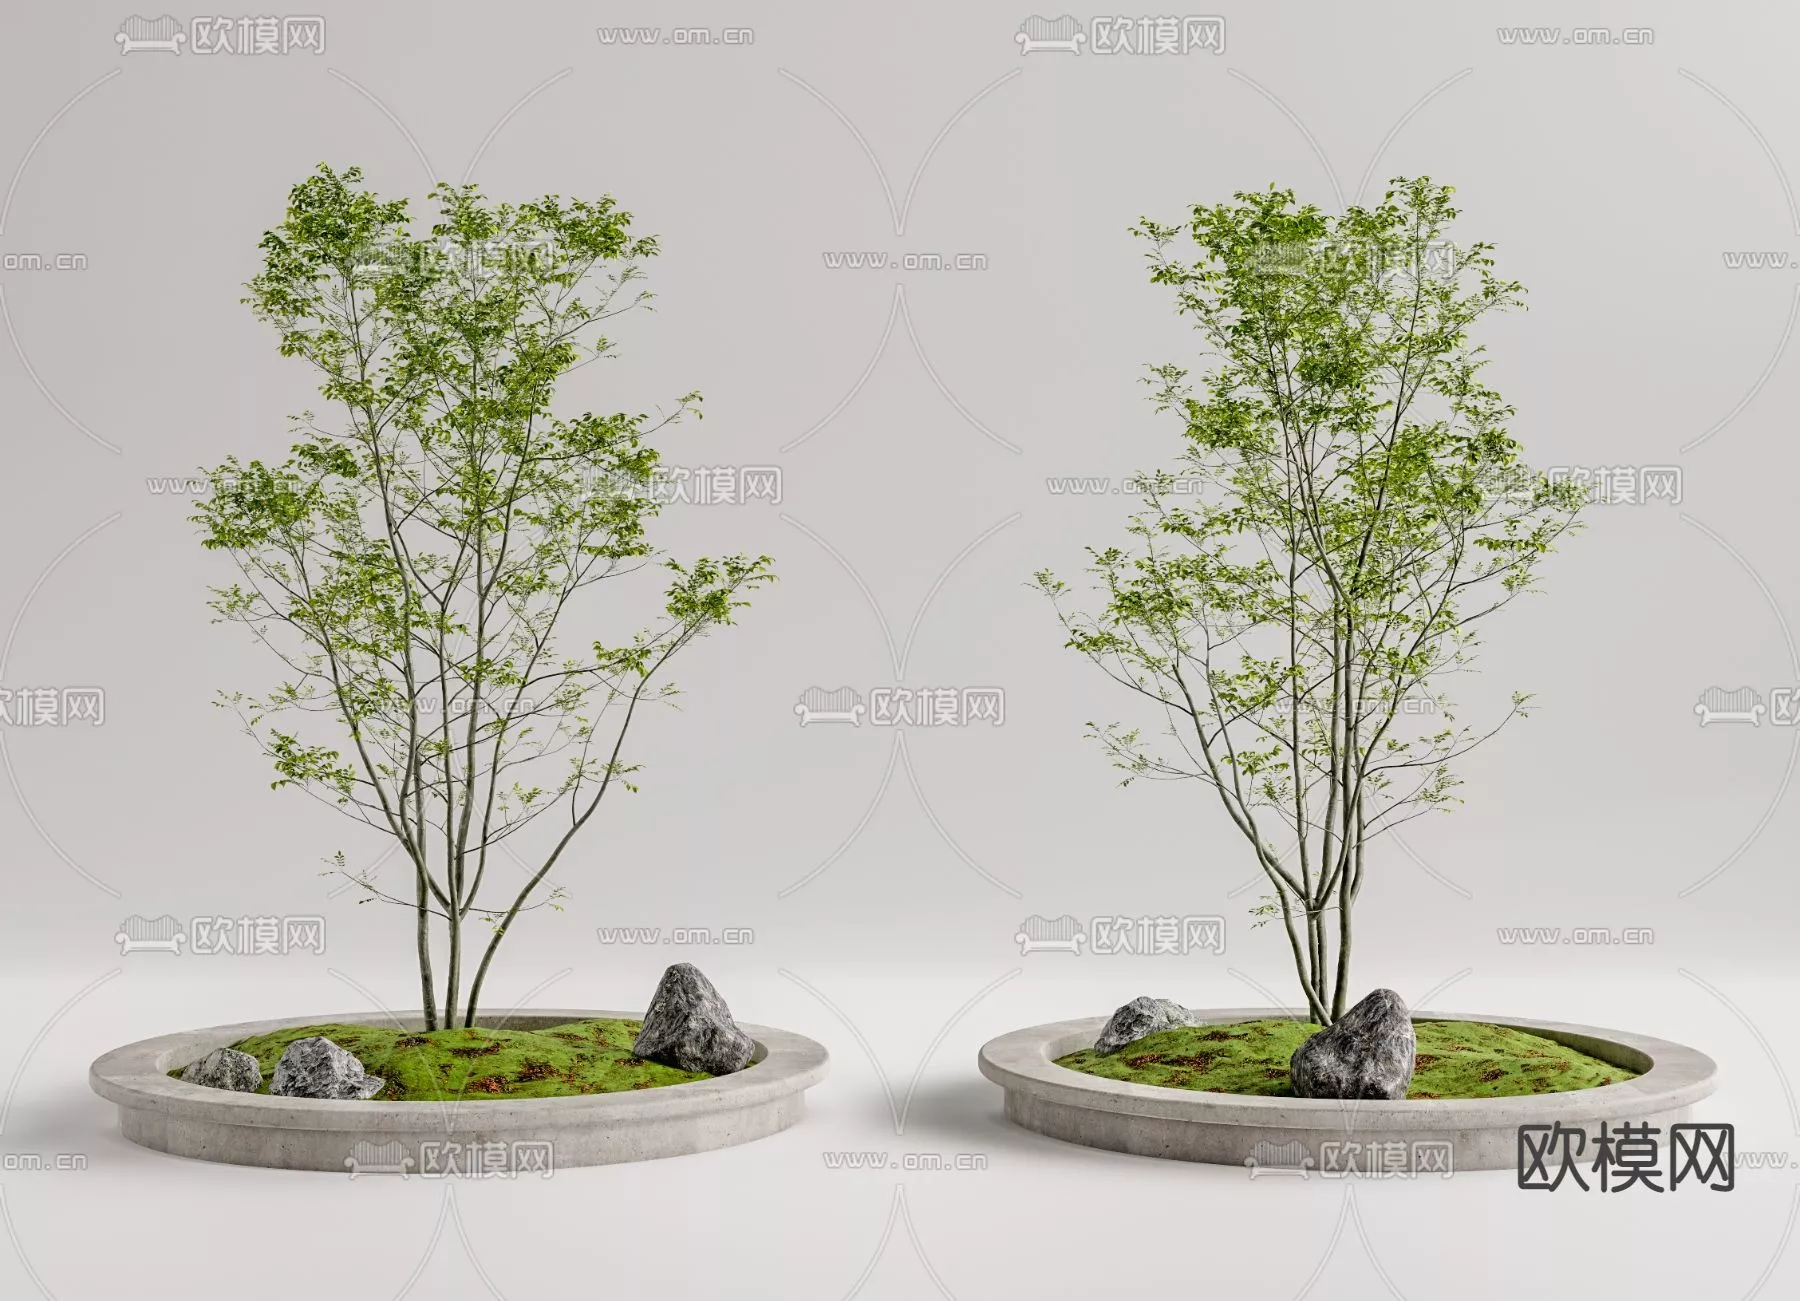 MODERN TREE - SKETCHUP 3D MODEL - VRAY OR ENSCAPE - ID15406